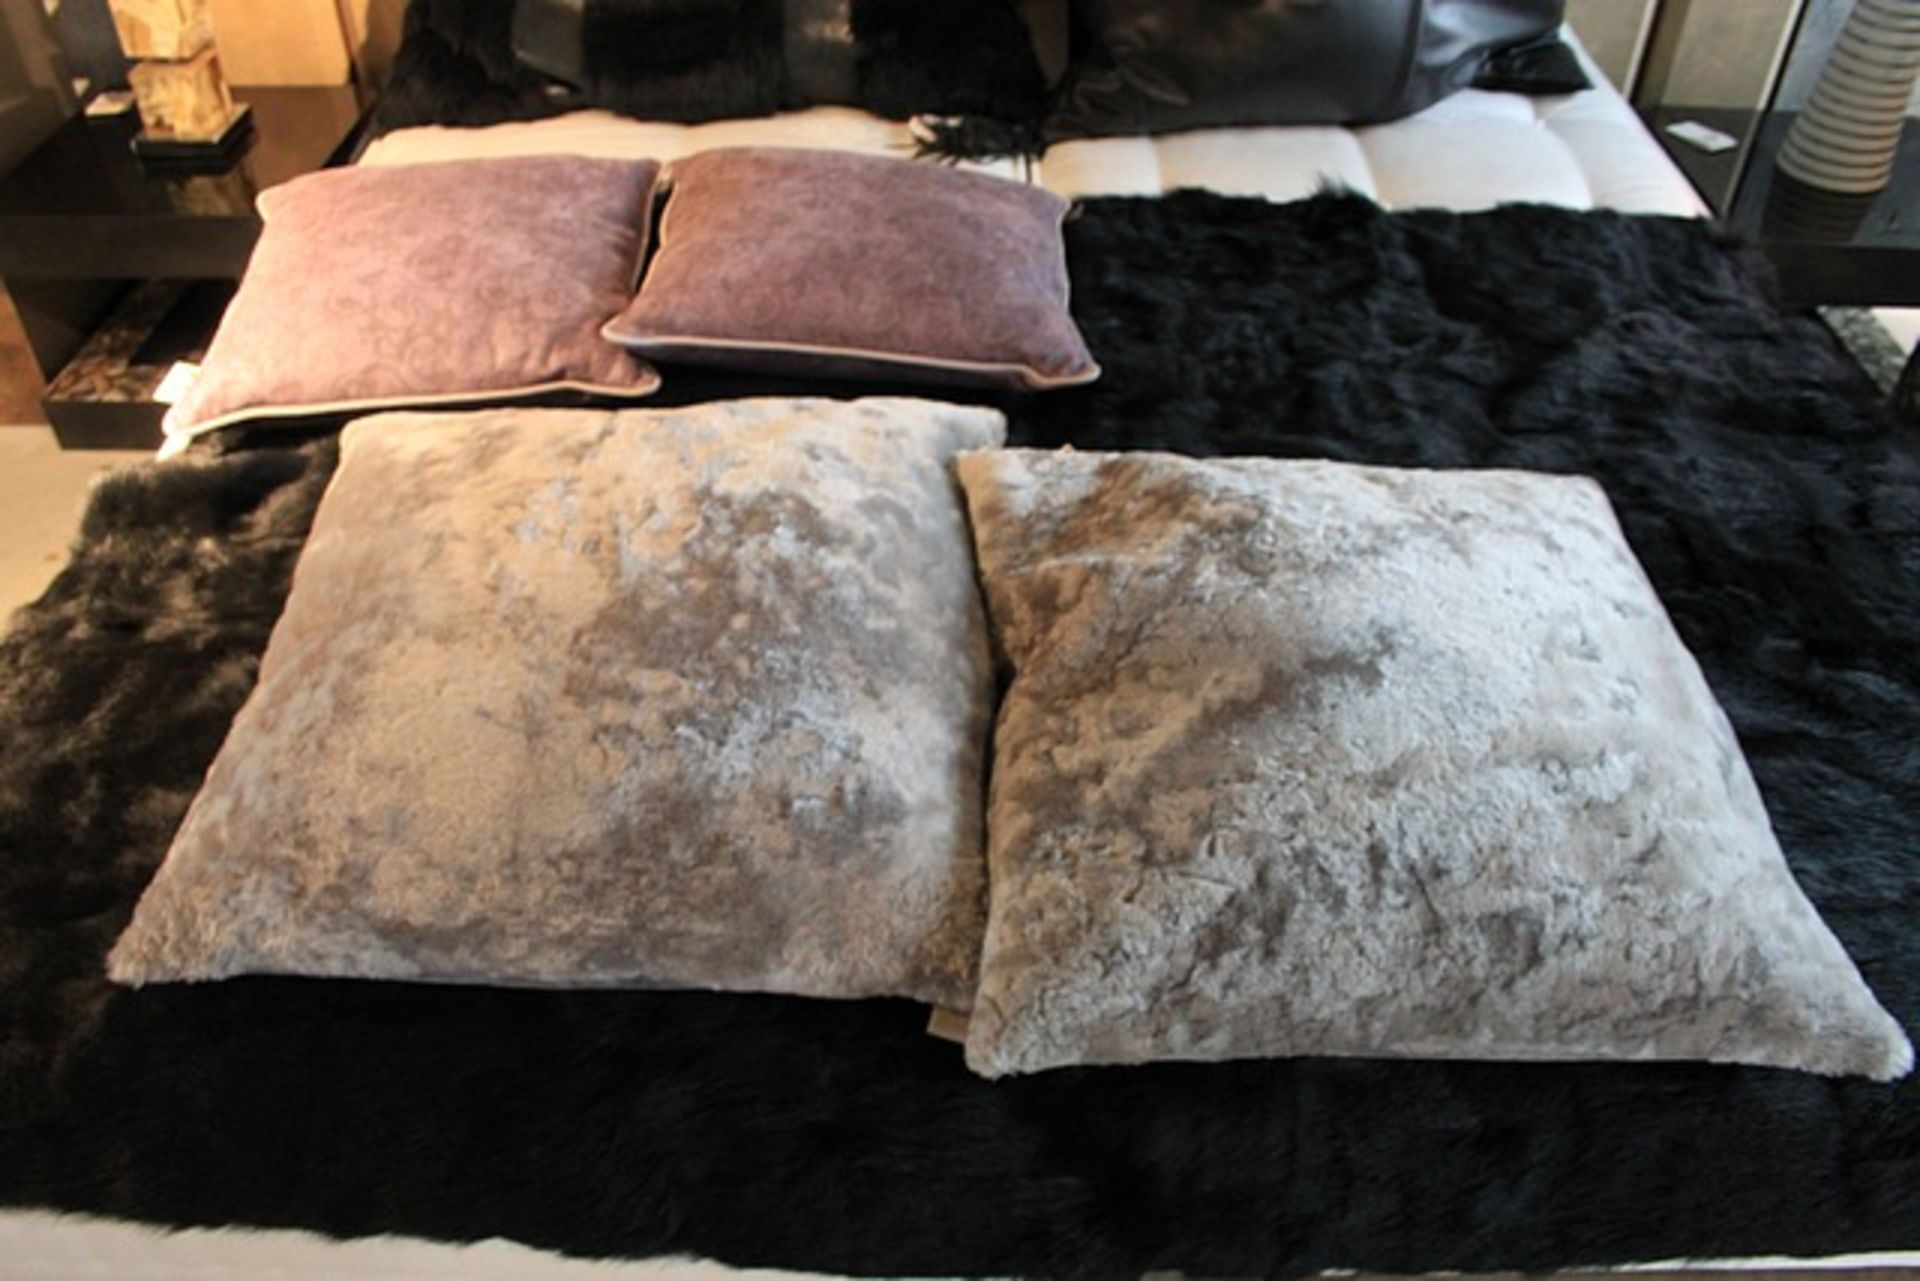 Cushion Grab ultra soft, grey curly lambskin and leather square cushion boasting textured laser